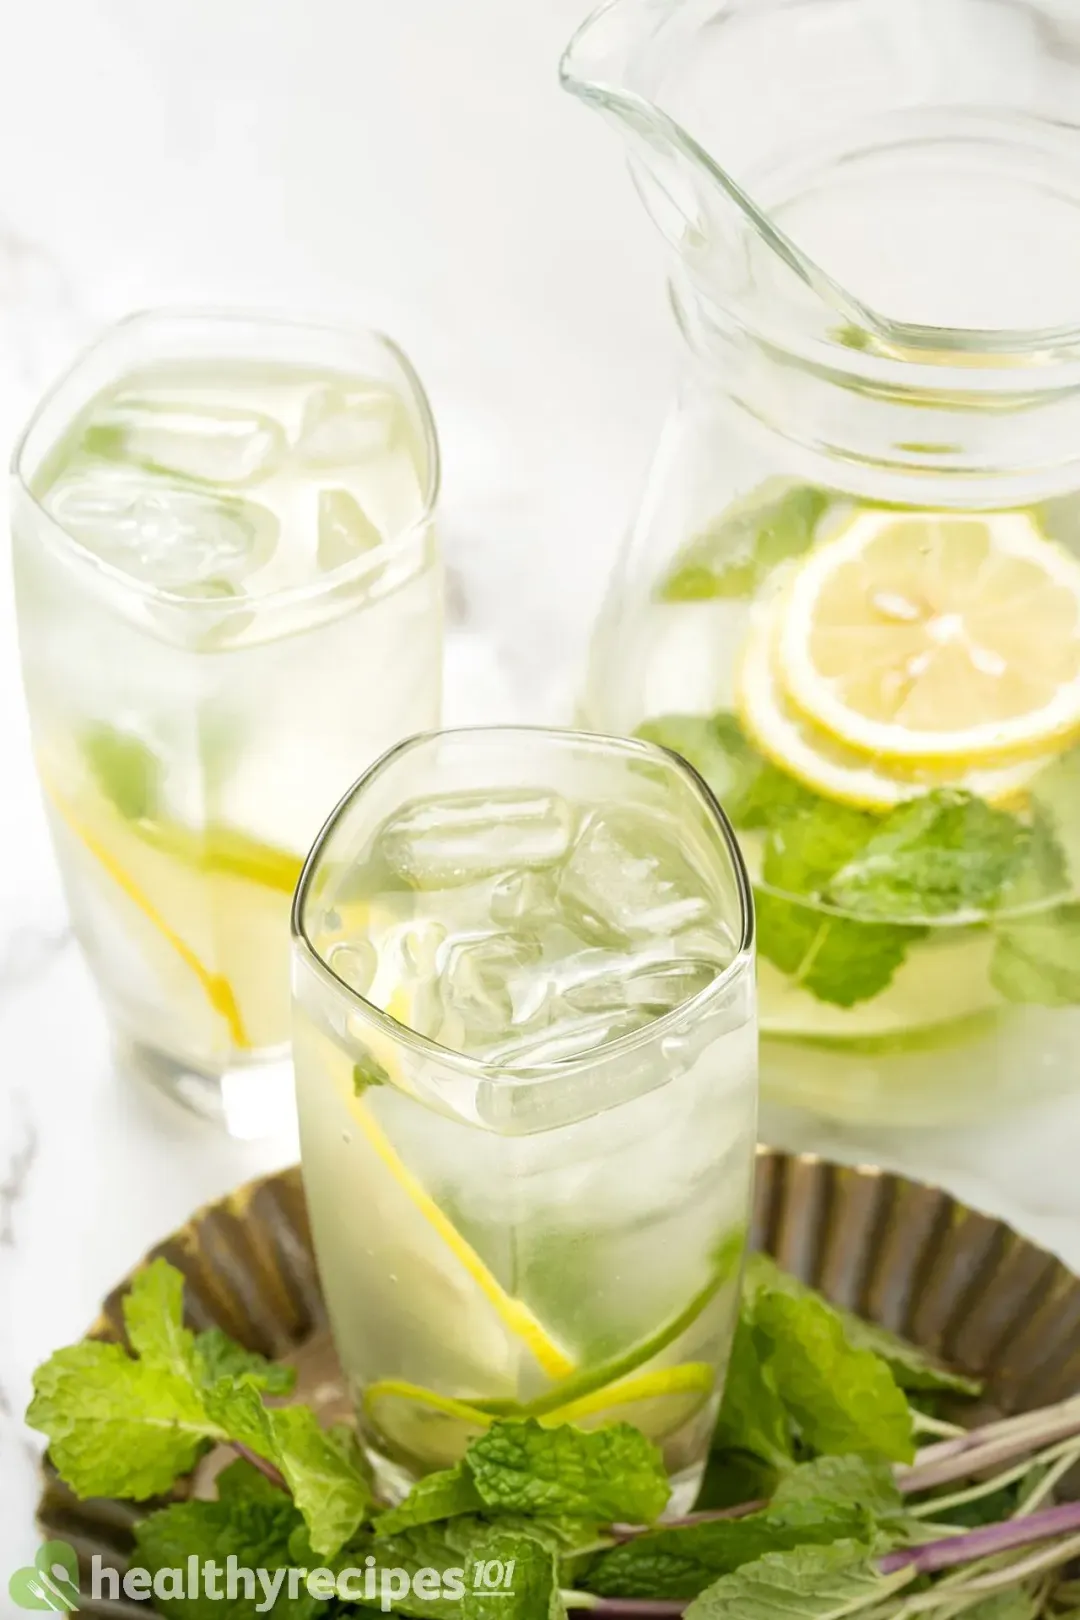 Two glasses and a pitcher of lemon water and mints, next to lots of mint leaves